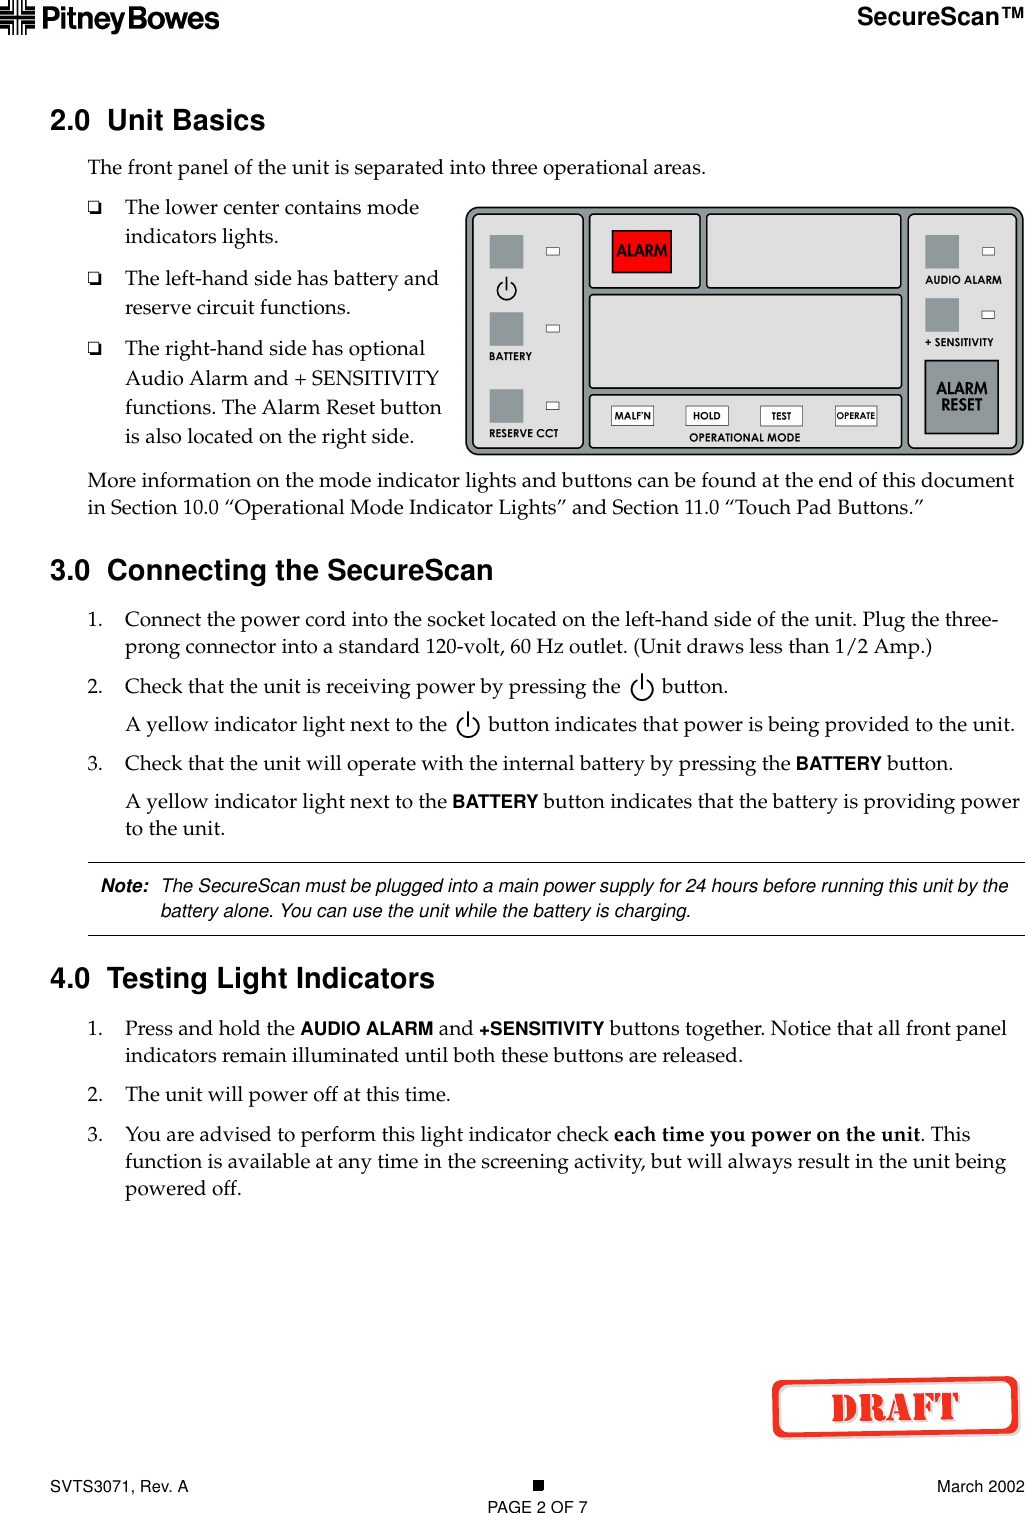 SVTS3071, Rev. A March 2002PAGE 2 OF 7SecureScan™2.0  Unit BasicsThe front panel of the unit is separated into three operational areas. ❏The lower center contains mode indicators lights.❏The left-hand side has battery and reserve circuit functions.❏The right-hand side has optional Audio Alarm and + SENSITIVITY functions. The Alarm Reset button is also located on the right side.More information on the mode indicator lights and buttons can be found at the end of this document in Section 10.0 “Operational Mode Indicator Lights” and Section 11.0 “Touch Pad Buttons.”3.0  Connecting the SecureScan1. Connect the power cord into the socket located on the left-hand side of the unit. Plug the three-prong connector into a standard 120-volt, 60 Hz outlet. (Unit draws less than 1/2 Amp.)2. Check that the unit is receiving power by pressing the   button.A yellow indicator light next to the   button indicates that power is being provided to the unit.3. Check that the unit will operate with the internal battery by pressing the BATTERY button.A yellow indicator light next to the BATTERY button indicates that the battery is providing power to the unit.4.0  Testing Light Indicators1. Press and hold the AUDIO ALARM and +SENSITIVITY buttons together. Notice that all front panel indicators remain illuminated until both these buttons are released.2. The unit will power off at this time.3. You are advised to perform this light indicator check each time you power on the unit. This function is available at any time in the screening activity, but will always result in the unit being powered off.Note: The SecureScan must be plugged into a main power supply for 24 hours before running this unit by the battery alone. You can use the unit while the battery is charging.